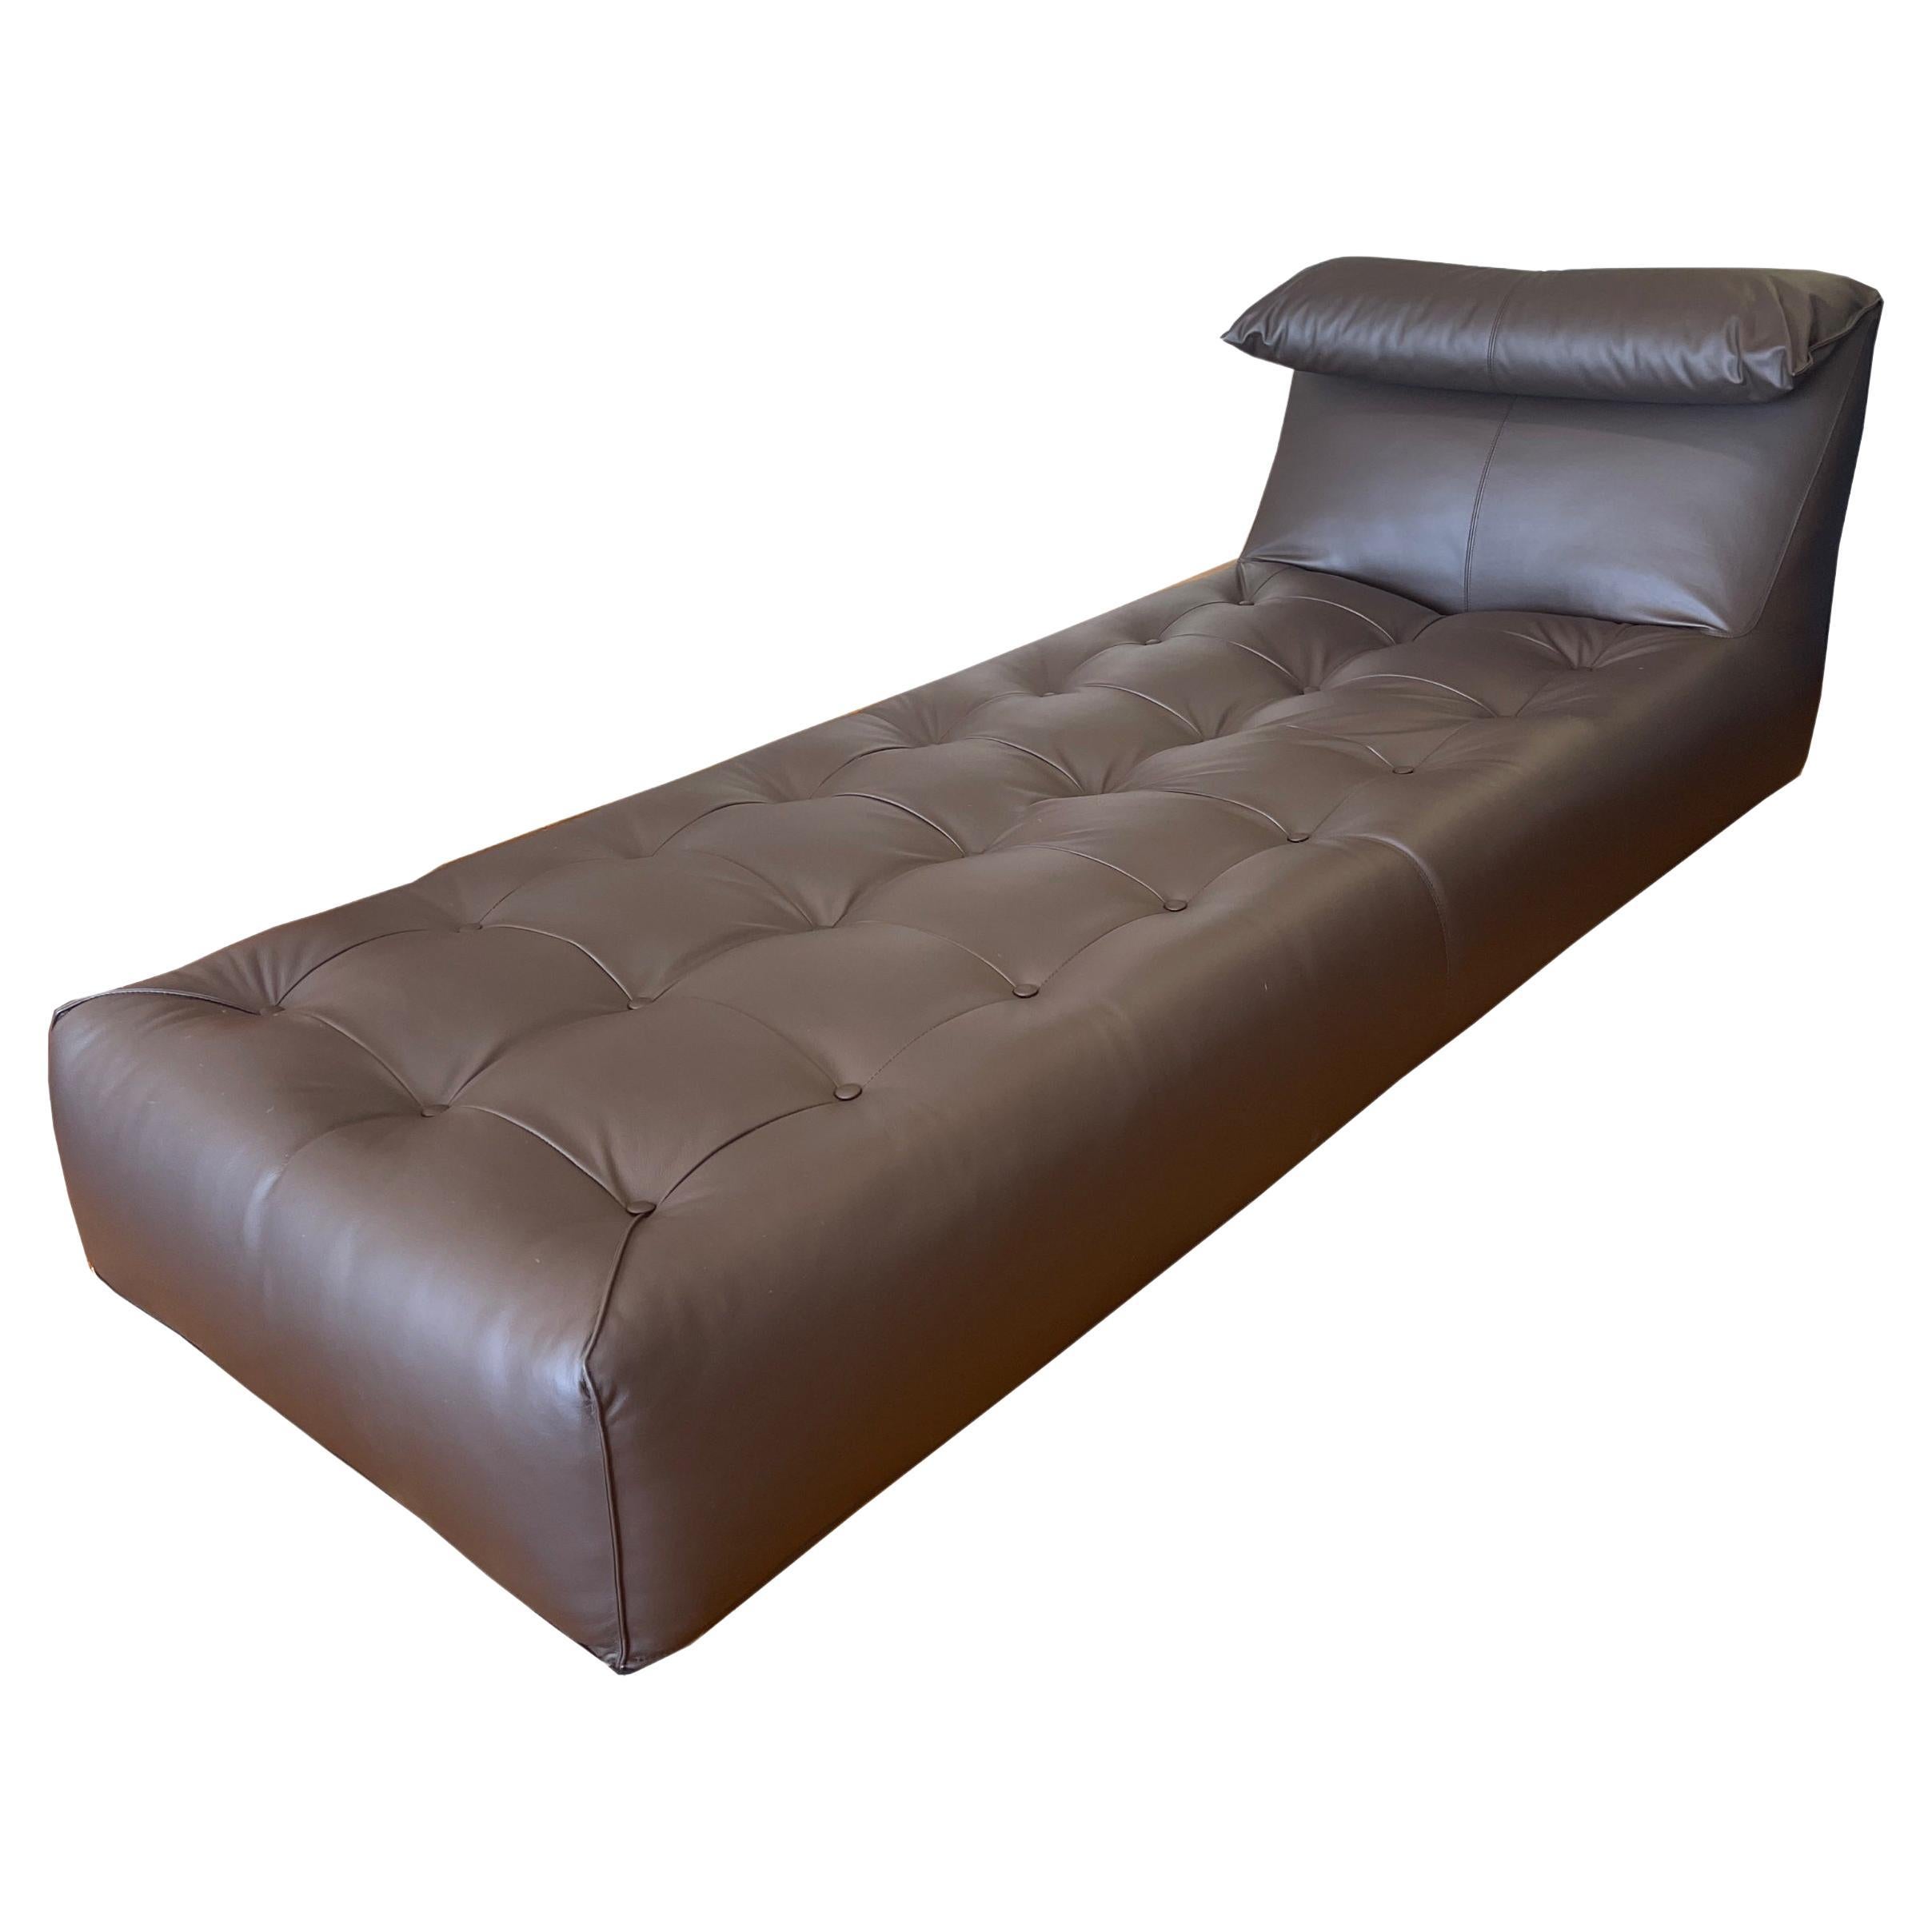 Mario Bellini Le Bambole Daybed 1970s B&B Italia newly upholstered brown leather For Sale